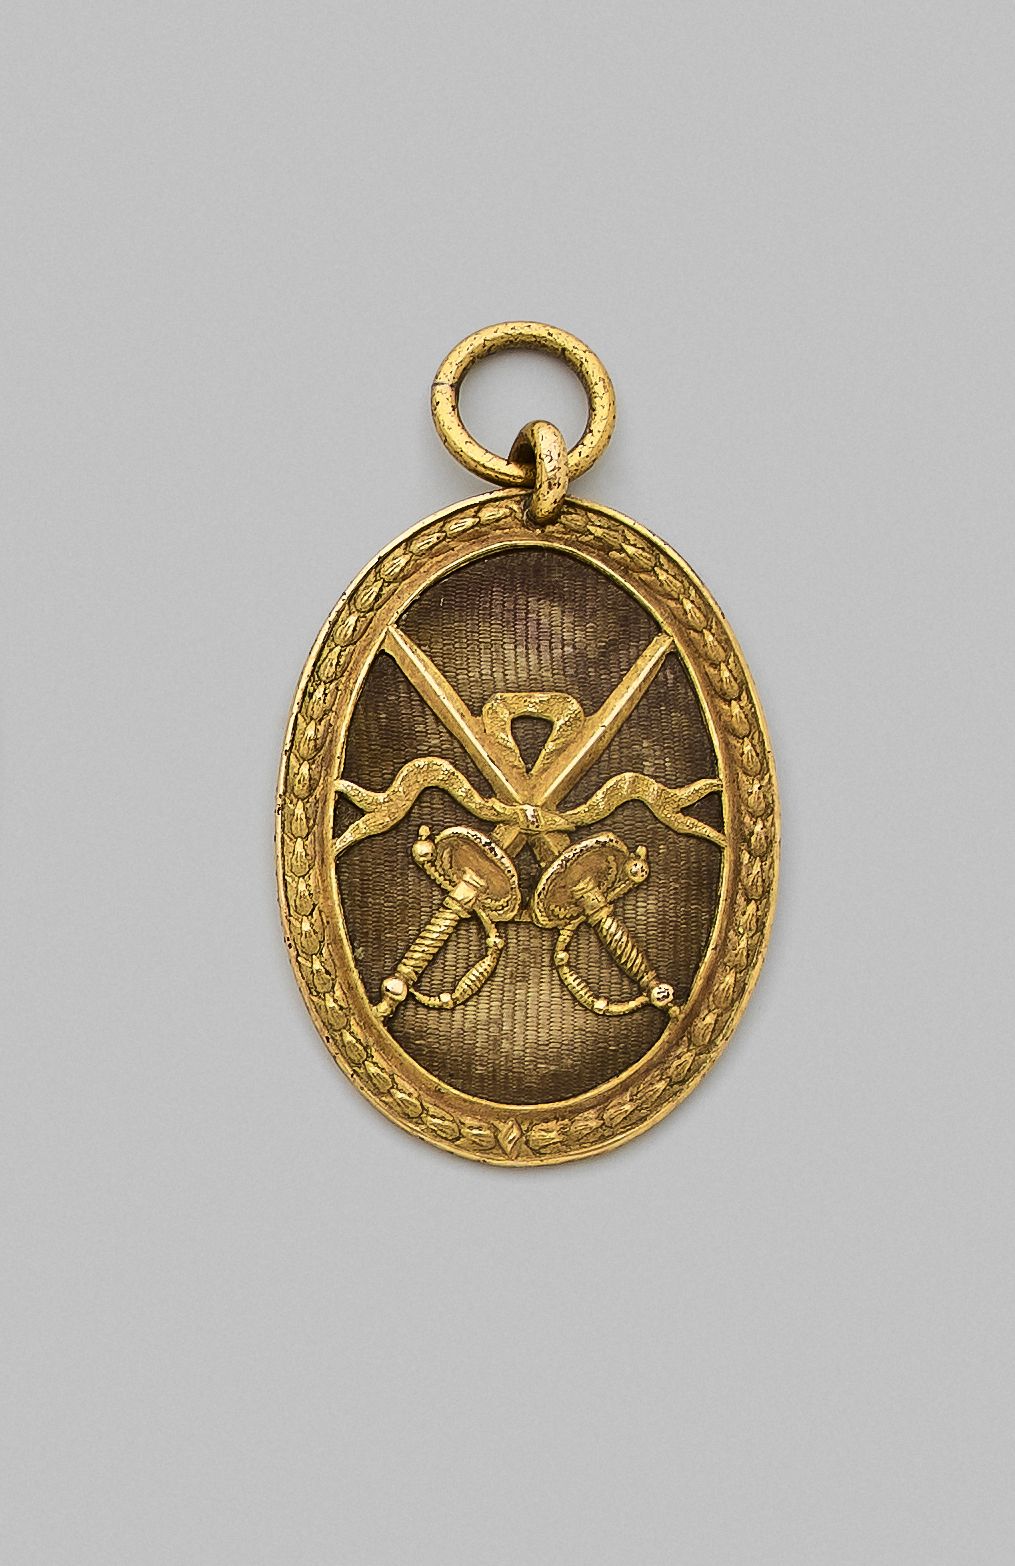 Null Beautiful Two Swords insignia, known as a "vetérance medallion", an officer&hellip;